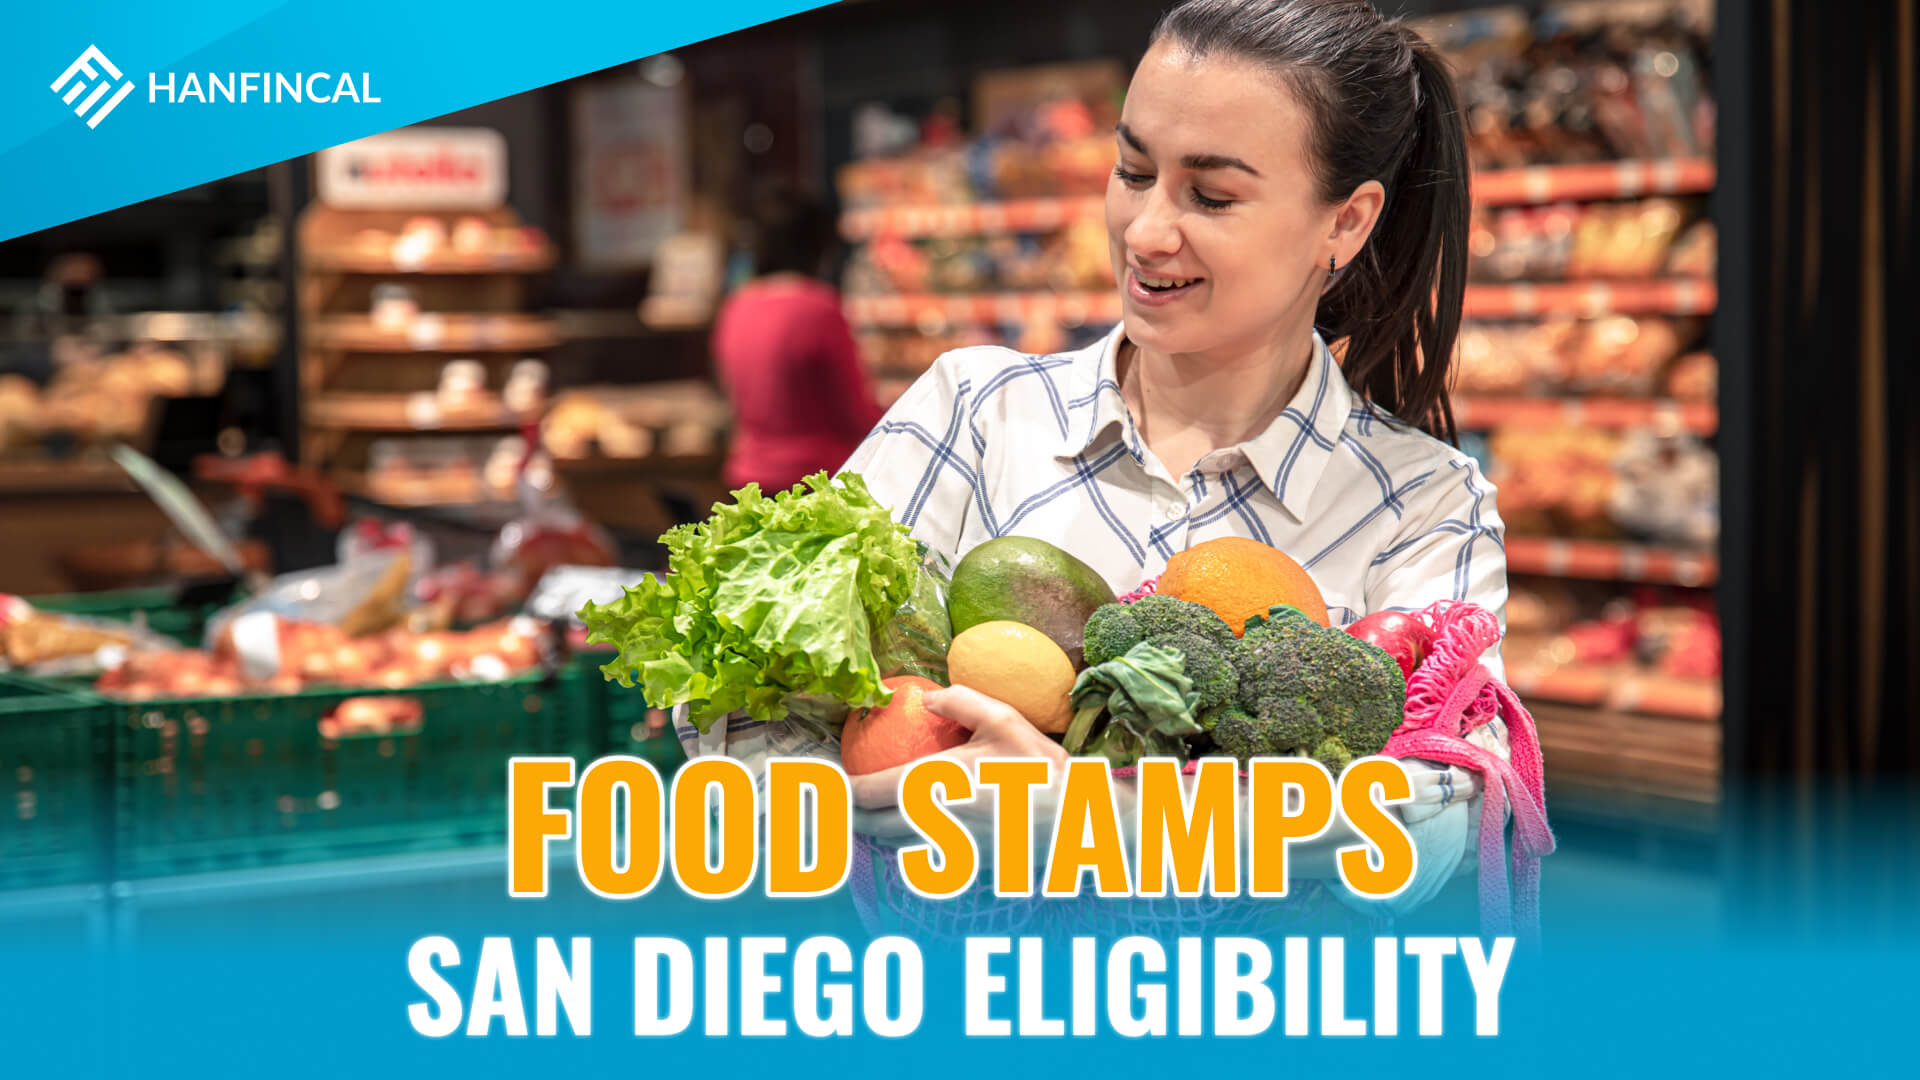 How To Apply For Food Stamps In San Diego?